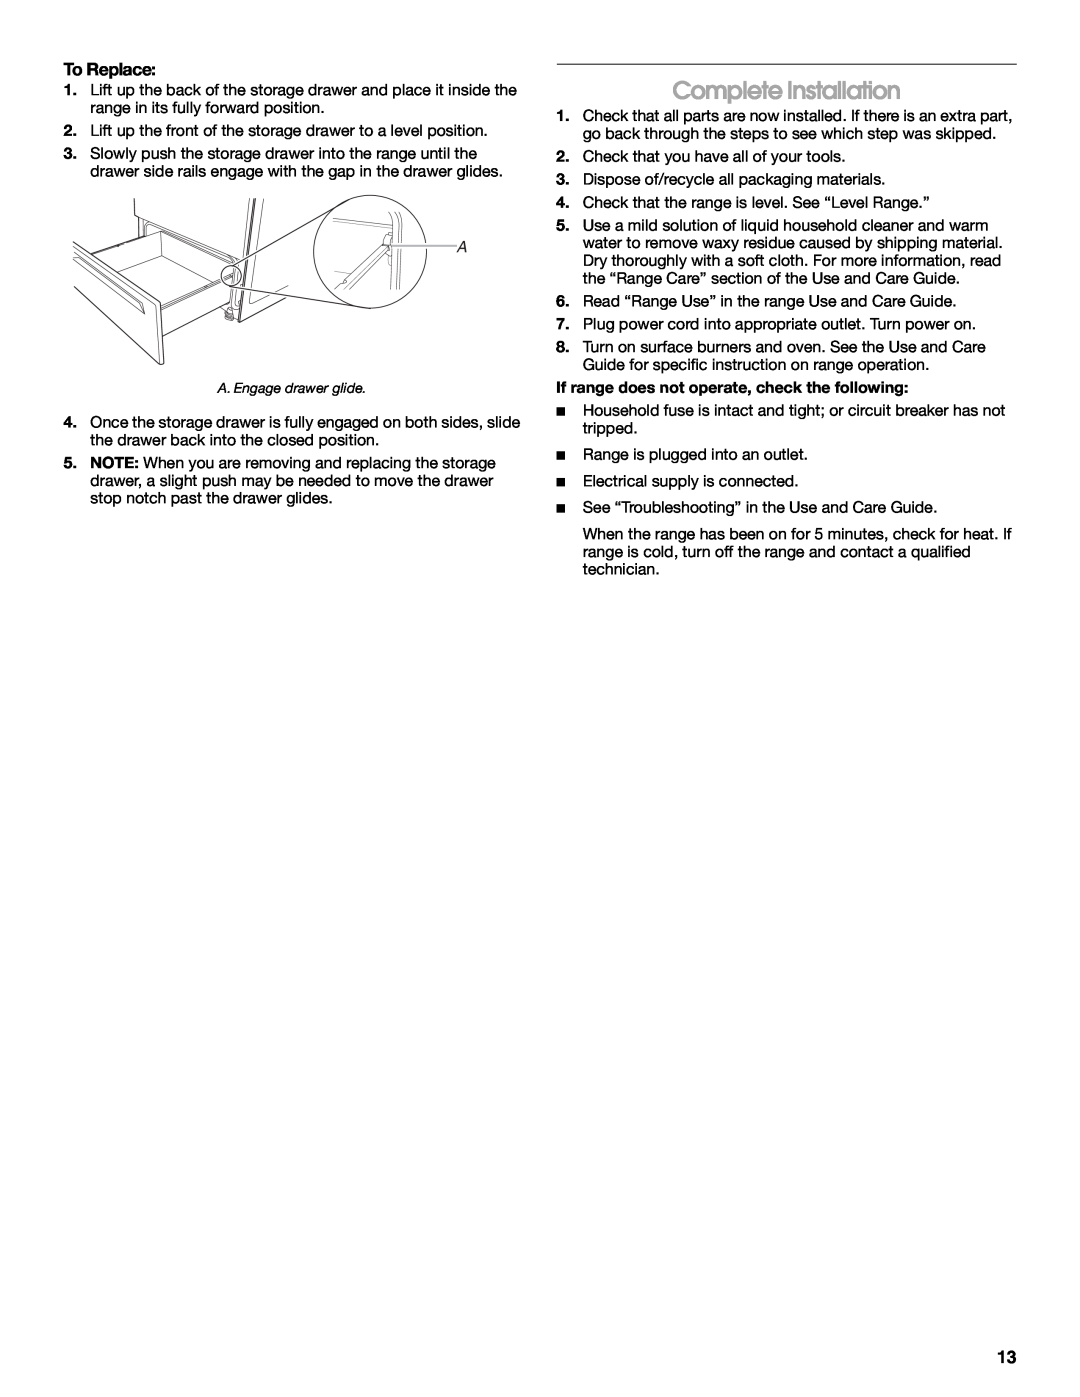 Maytag W10252706B installation instructions Complete Installation, To Replace 